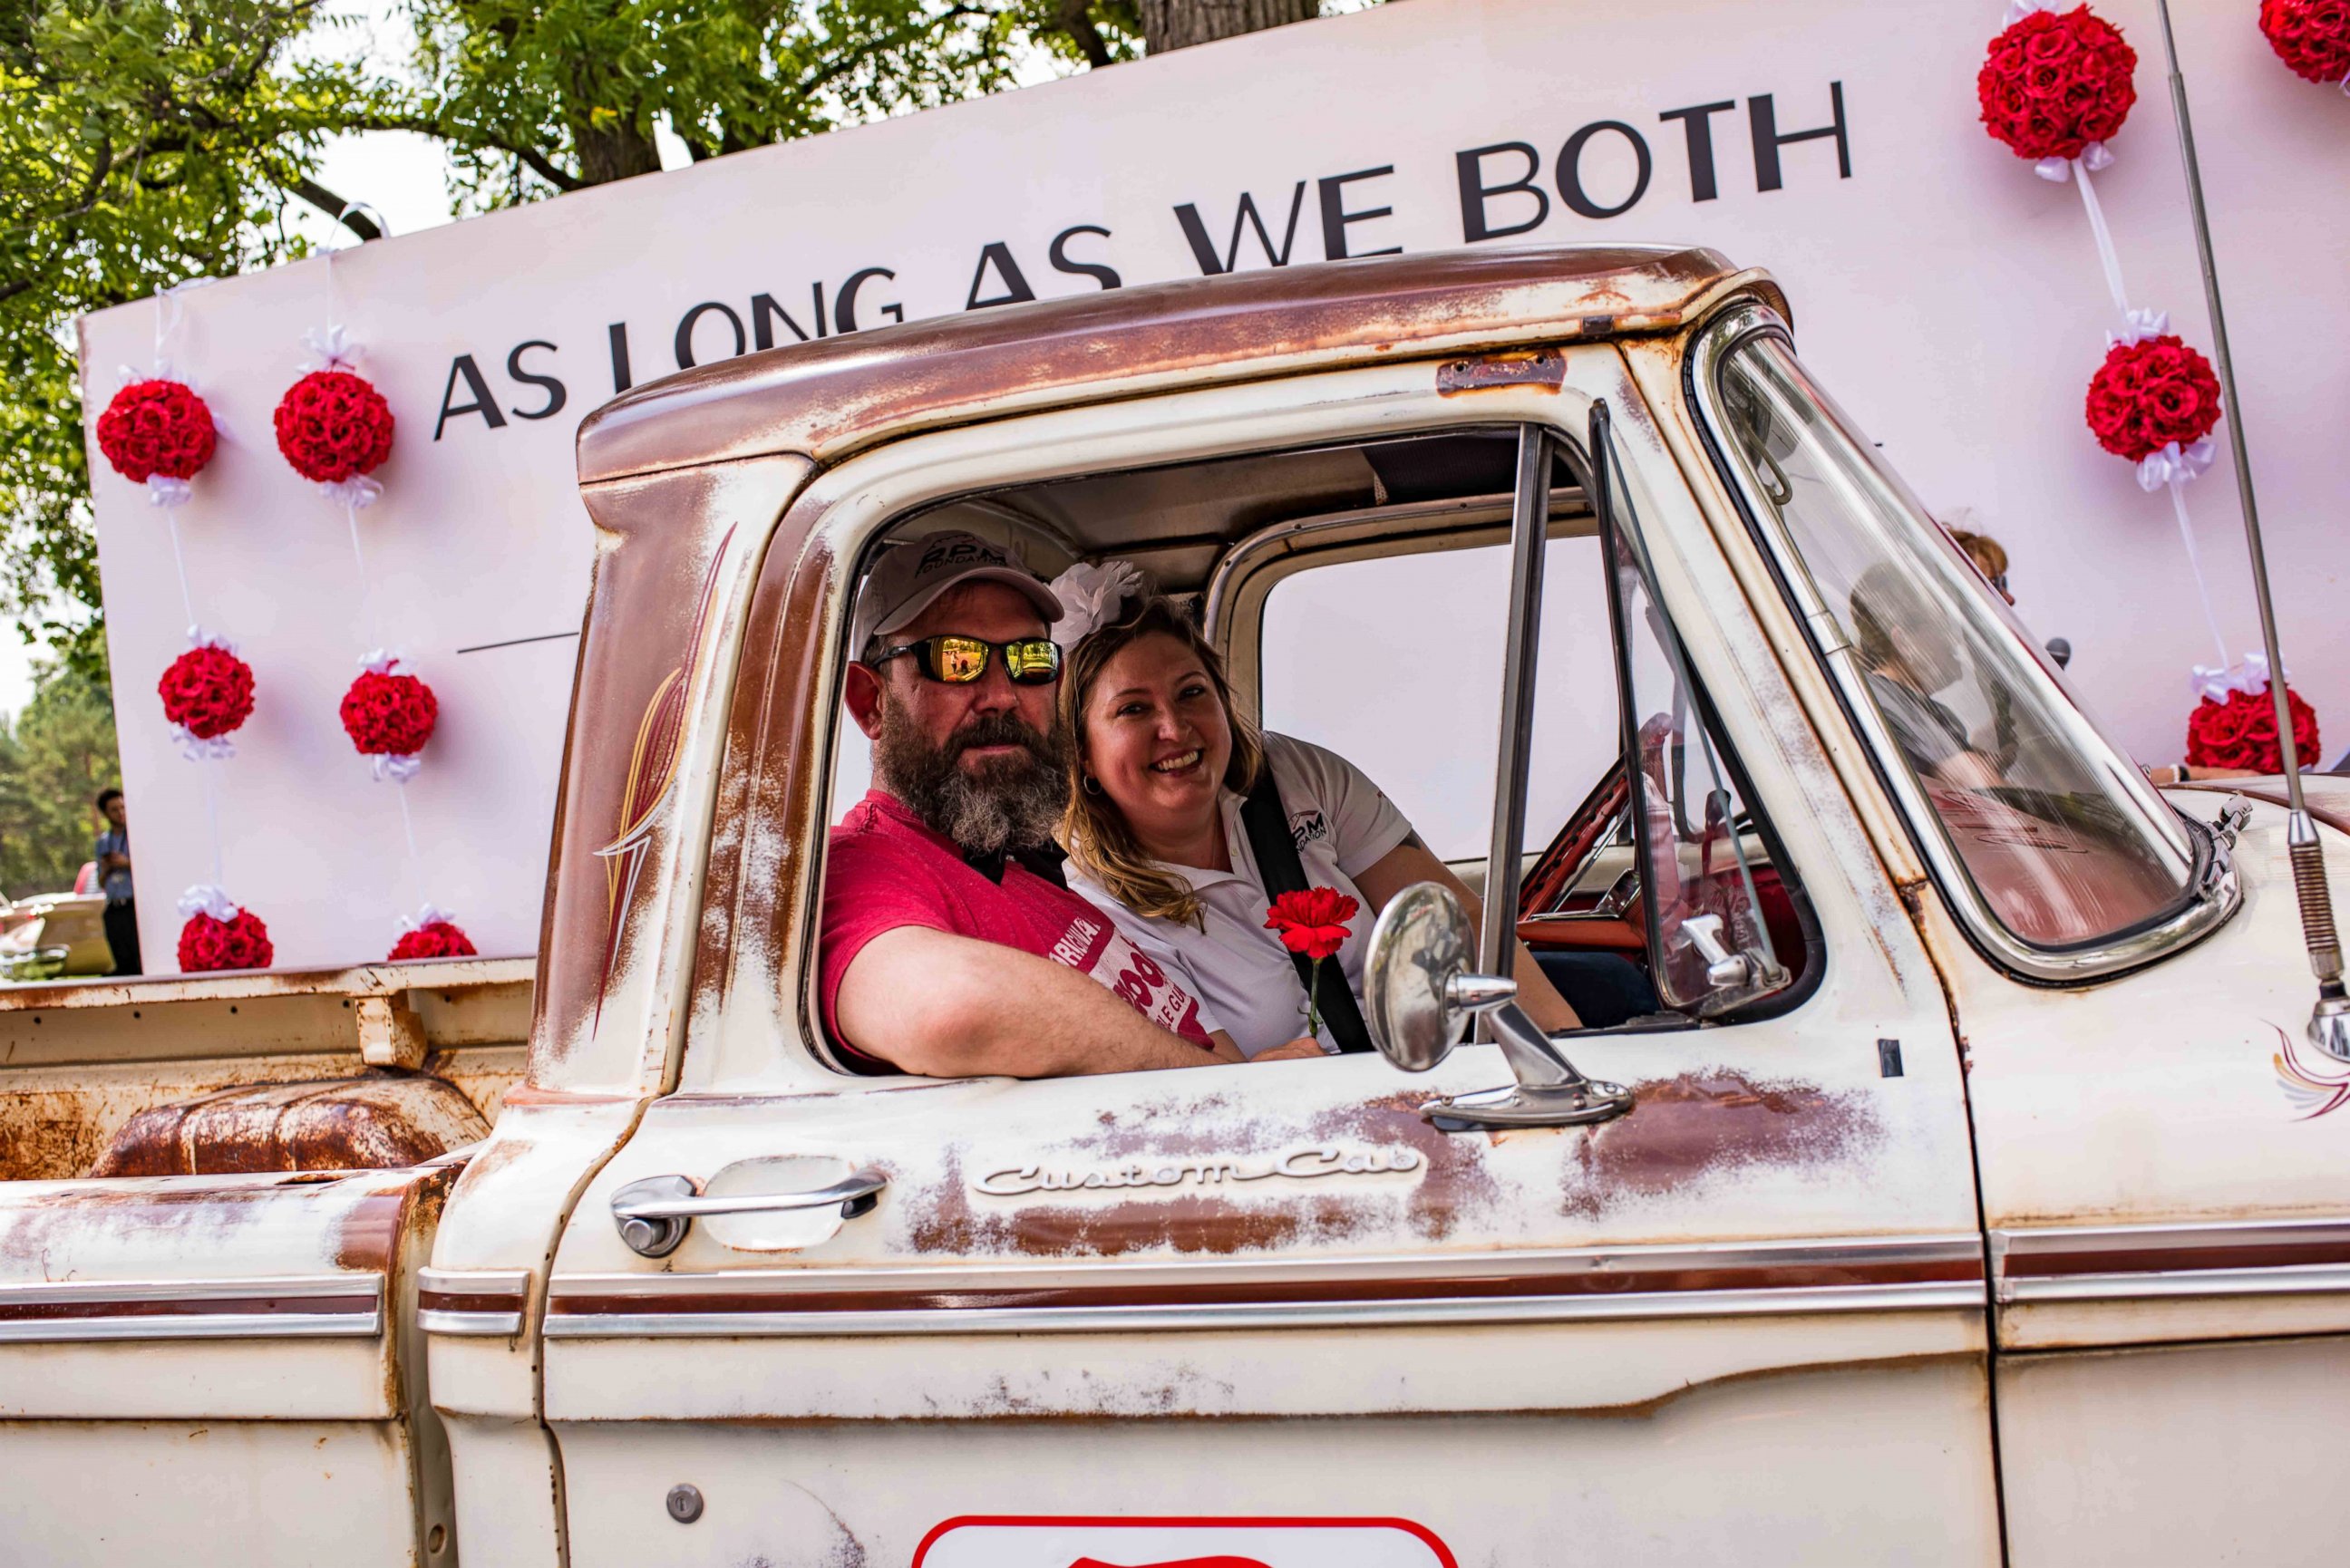 PHOTO: 100 Couples Renew Wedding Vows in Classic Cars: ‘As Long As We Both Shall Cruise’ 